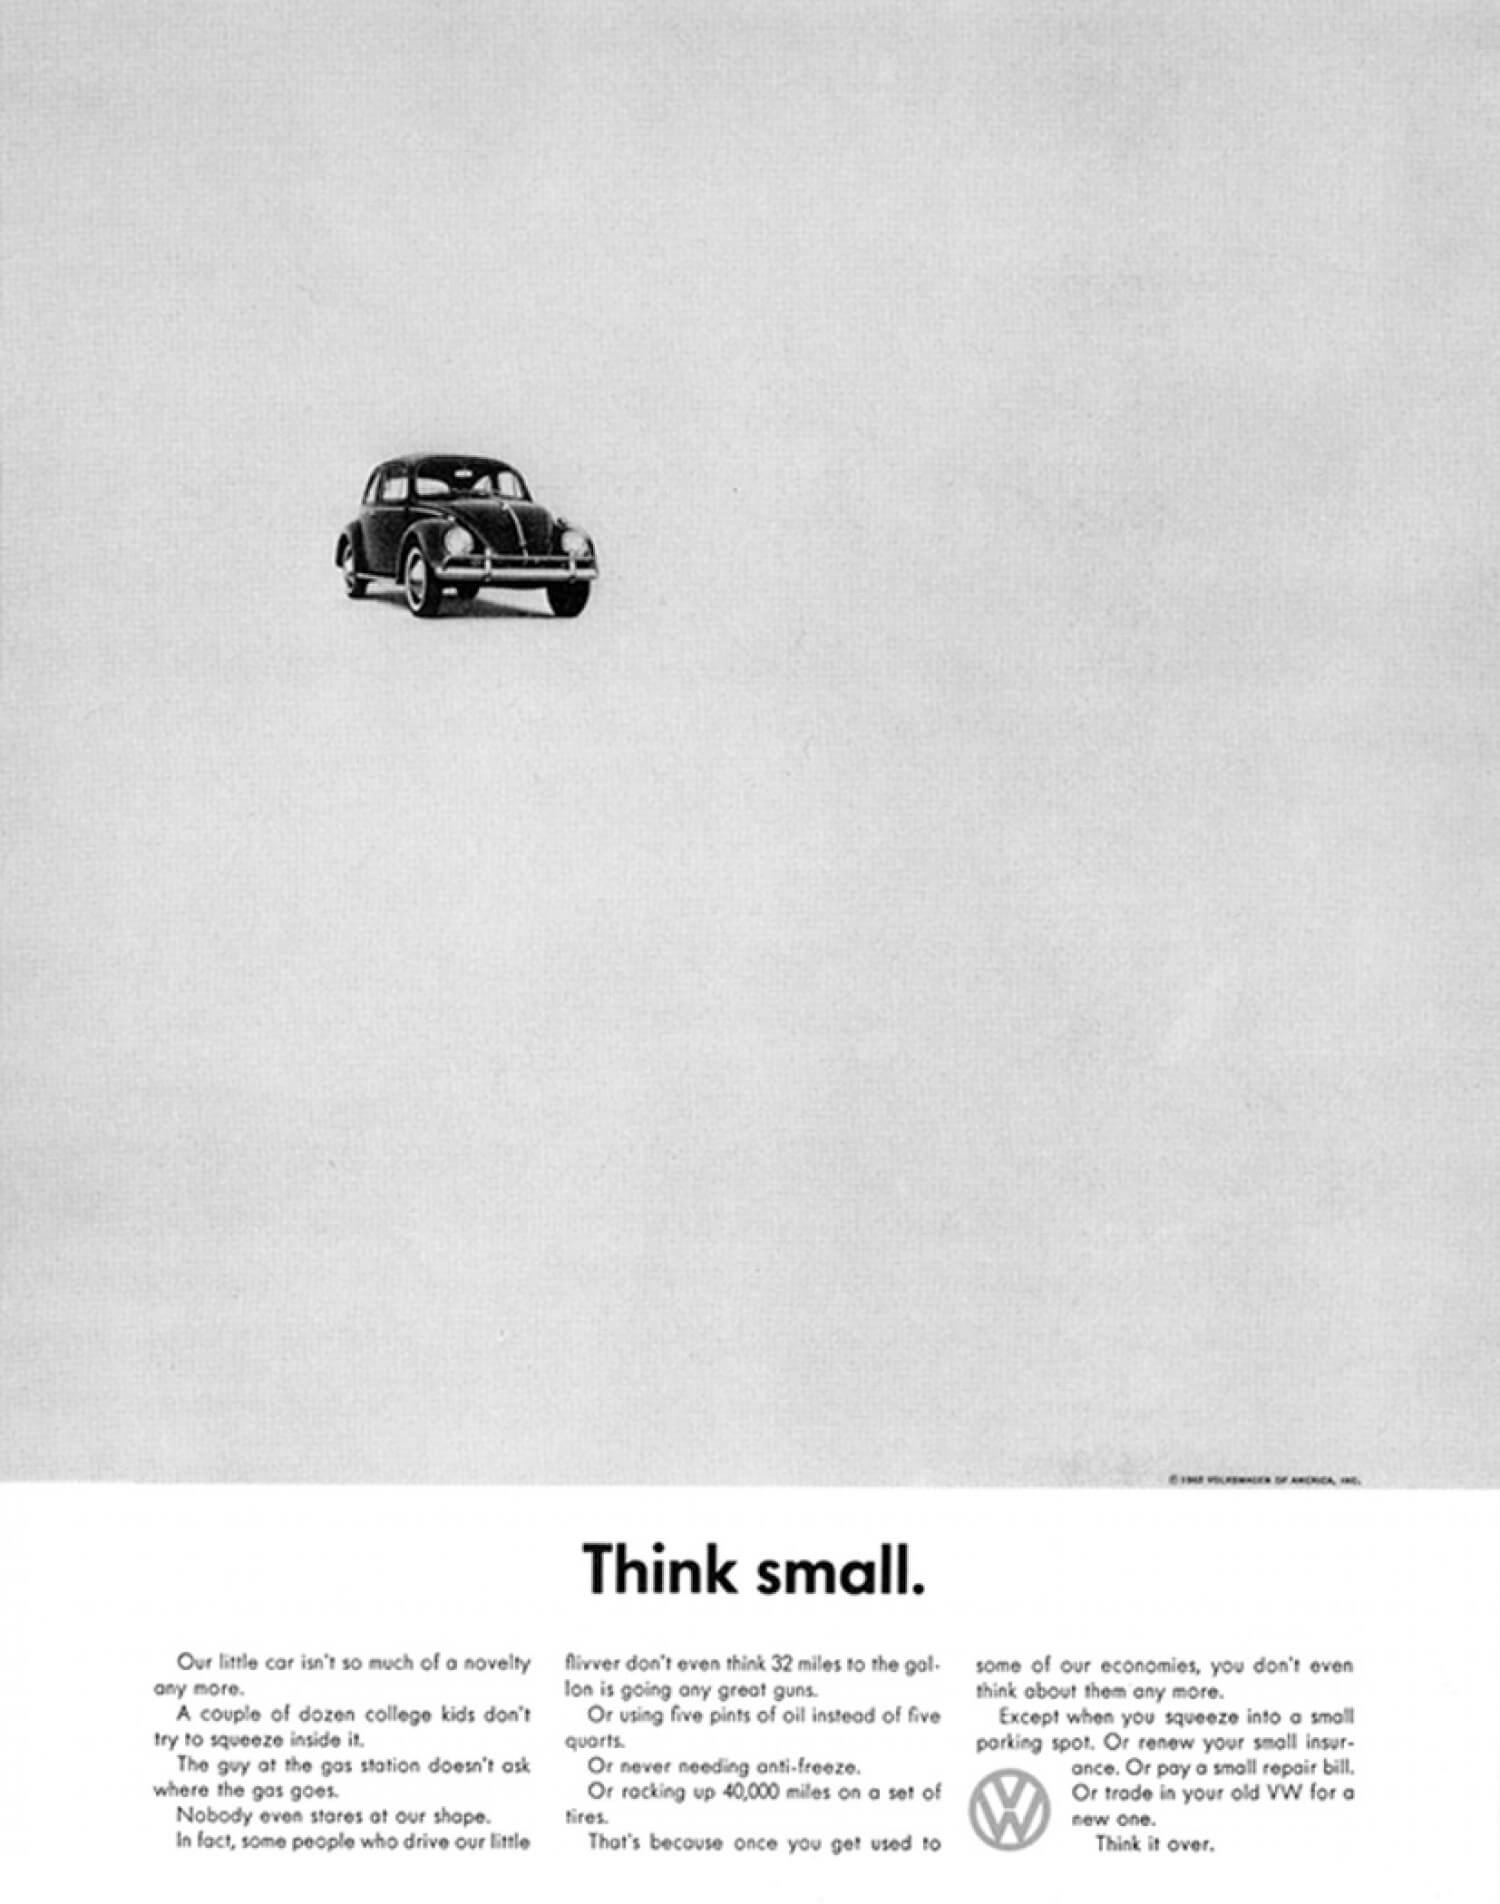 Famous Volkswagen "Think Small" print advertisement